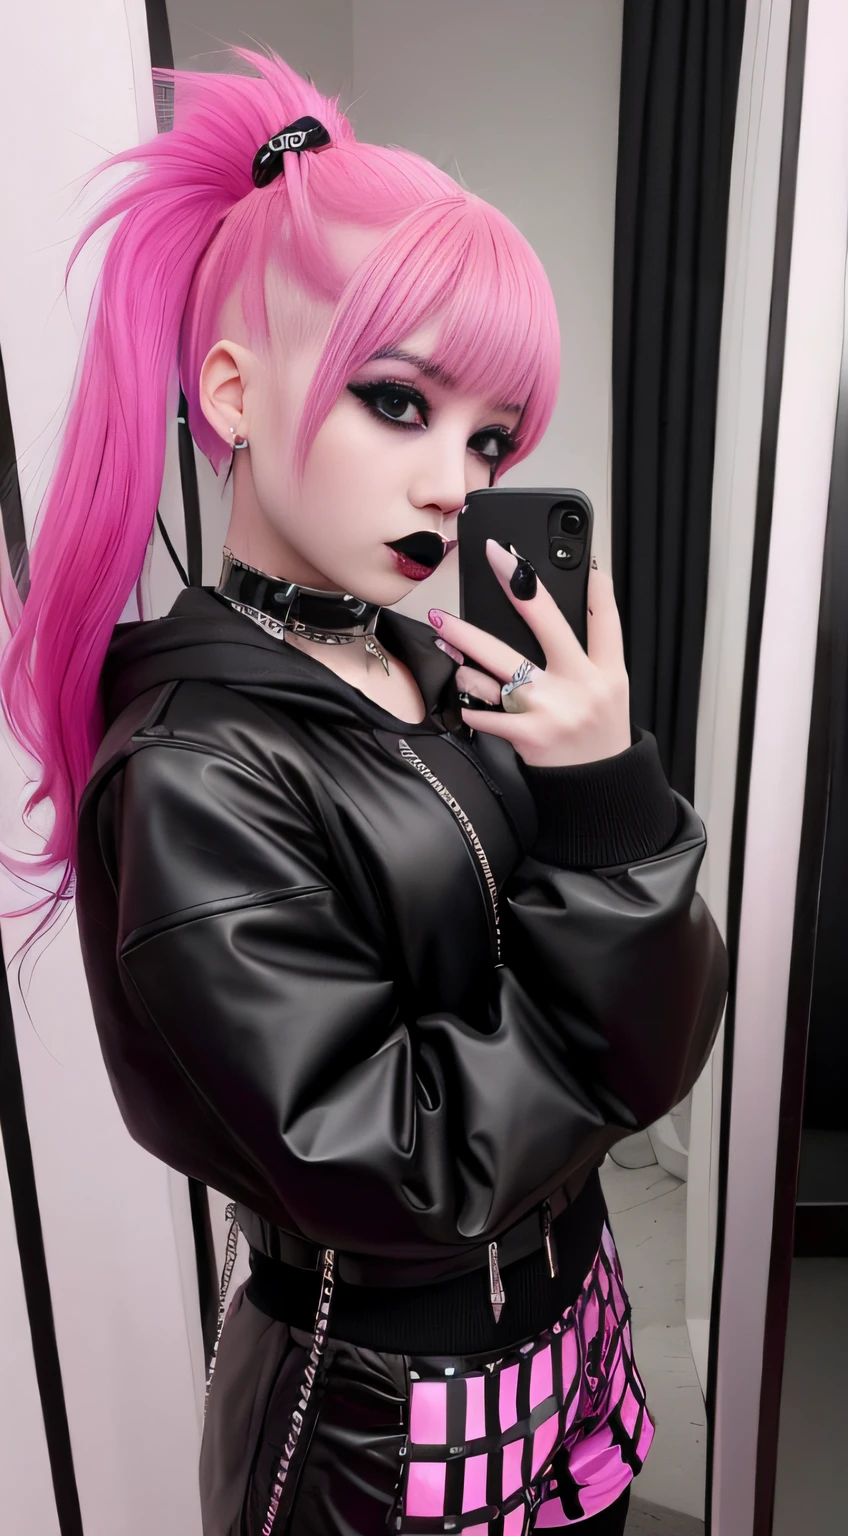 araffe girl with pink hair taking a selfie in a mirror, goth girl aesthetic, goth aesthetic, cybergoth, goth girl, cyber punk setting, darkwave goth aesthetic, mall goth, 17 - year - old goth girl, goth vibe, pastel goth aesthetic, goth punk clothes, goth style, all black cyberpunk clothes, neo goth, outfit photo, gothcore